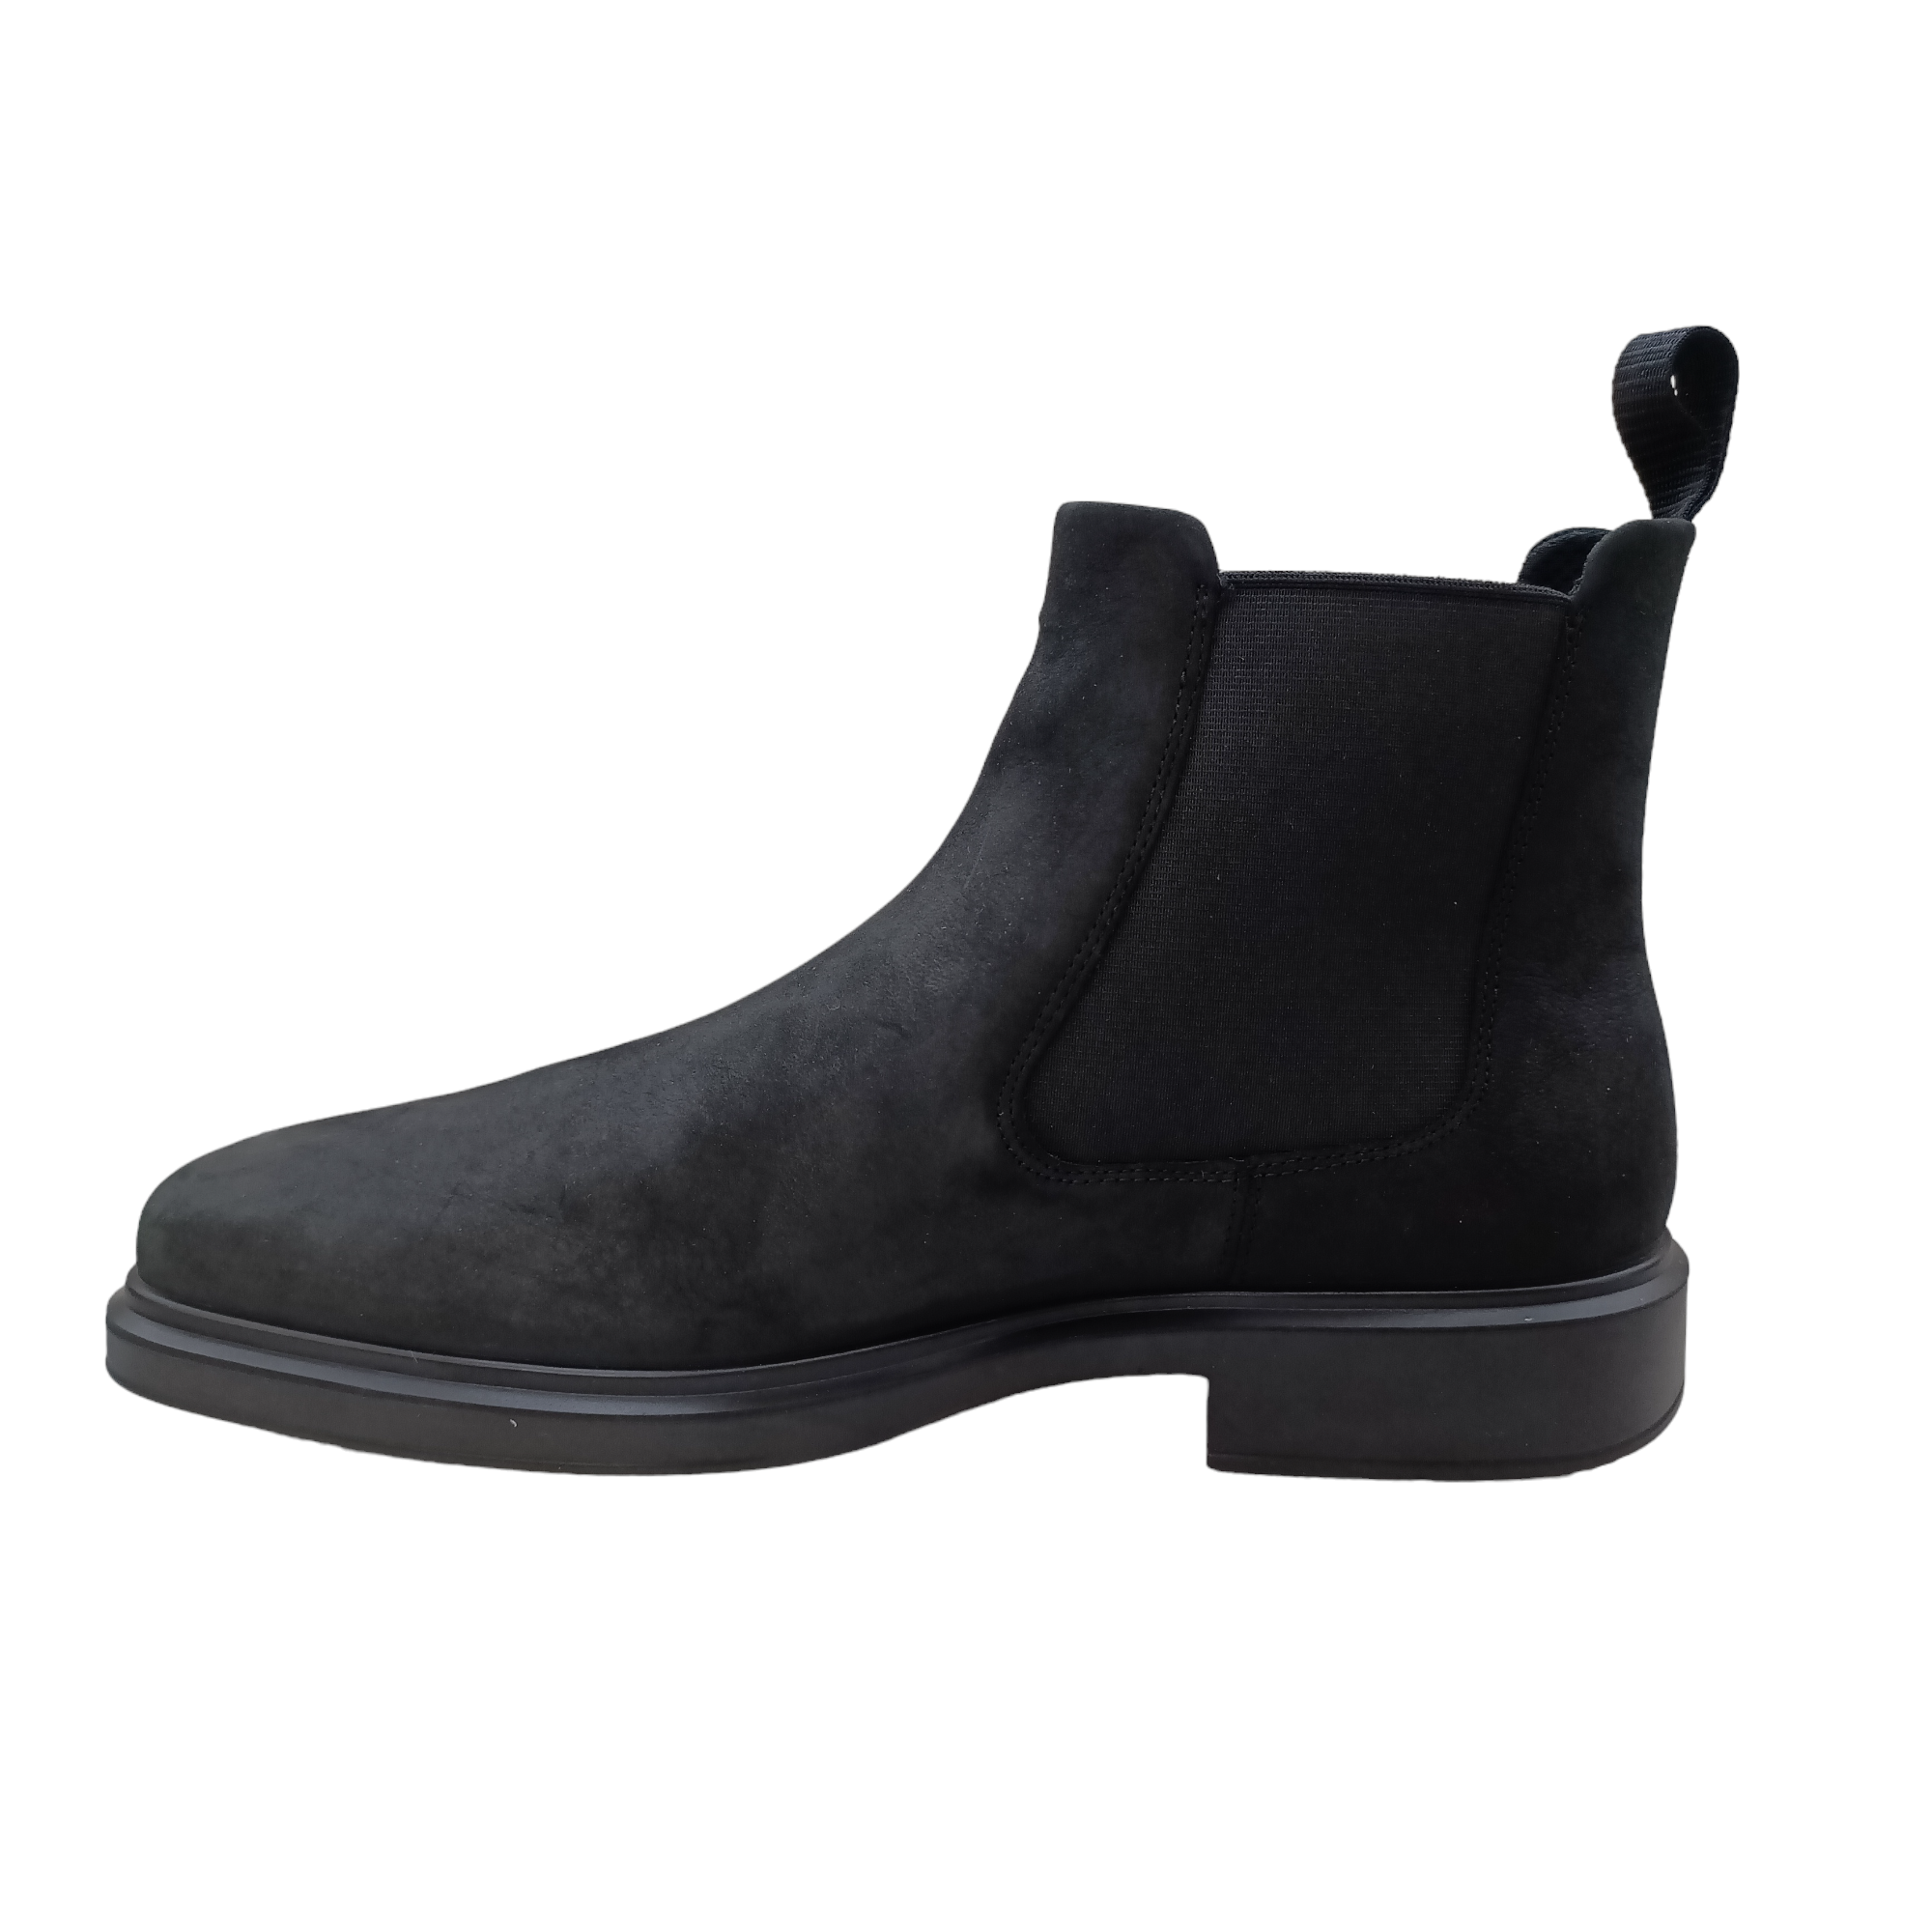 Shop Helsinki 2 M - with shoe&amp;me - from Ecco - Boots - Boot, Mens, Winter